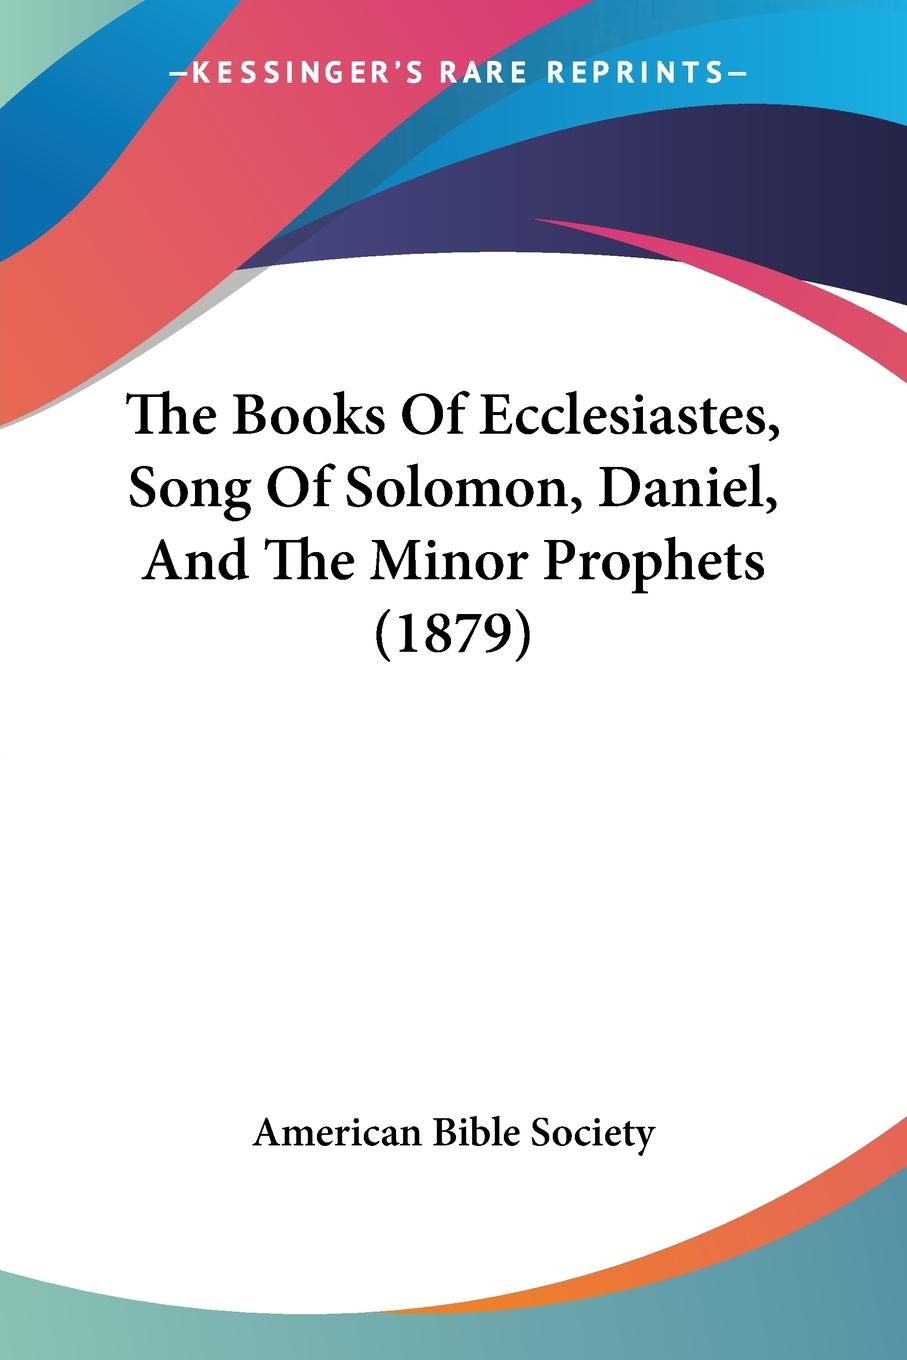 The Books Of Ecclesiastes, Song Of Solomon, Daniel, And The Minor Prophets (1879) - American Bible Society